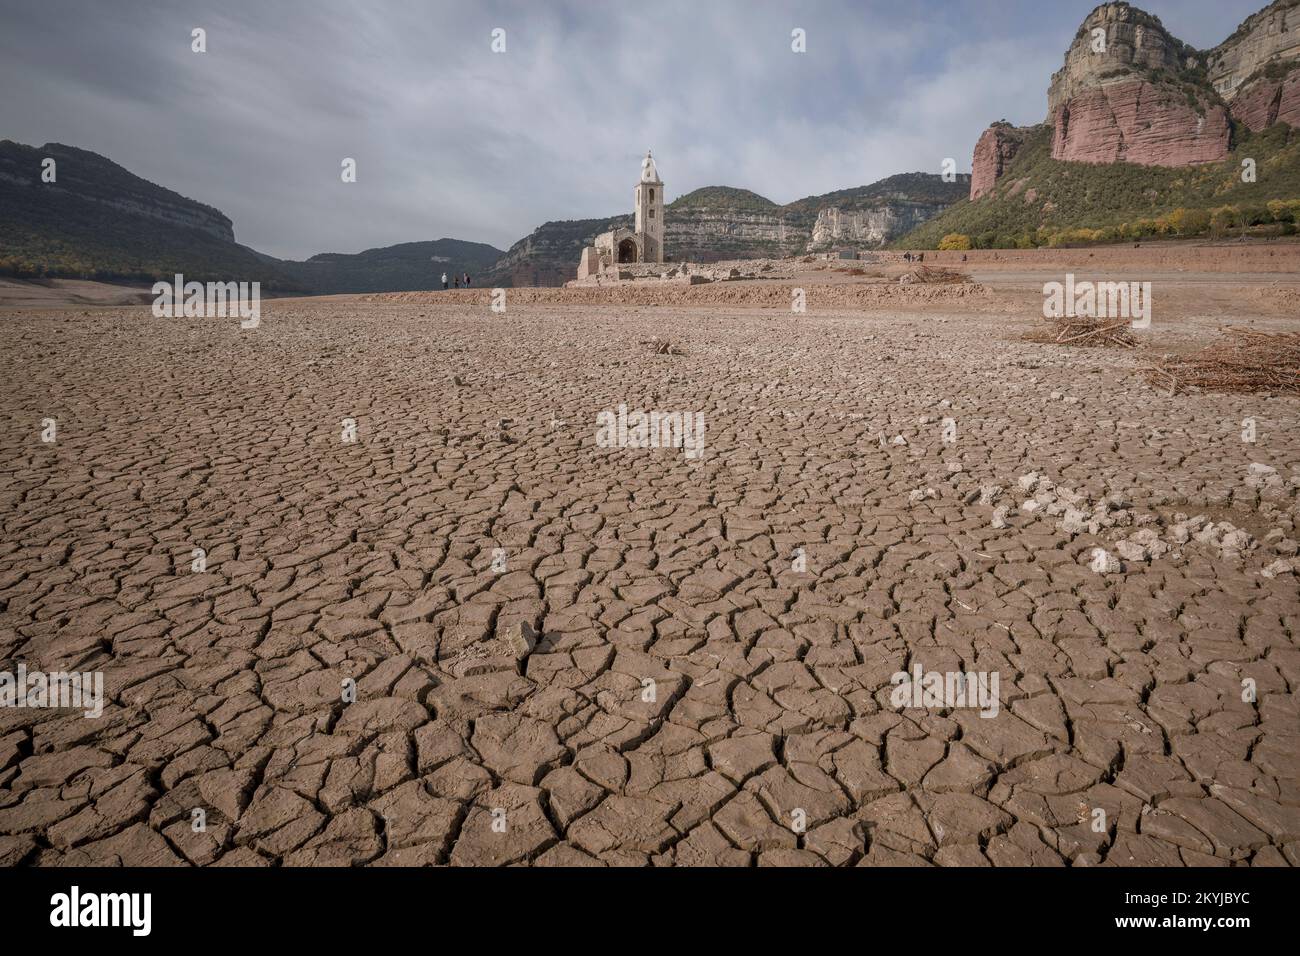 Sau reservoir at 30% of its water capacity.  Views of the scarcity of water in the Sau reservoir where normally the bell tower of the old town of Sant Romà de Sau lies almost completely under water in Sau swamp, Vilanova de Sau, Catalonia,  Spain, on November 29, 2022  © Joan Gosa 2022/Alamy Stock Photo